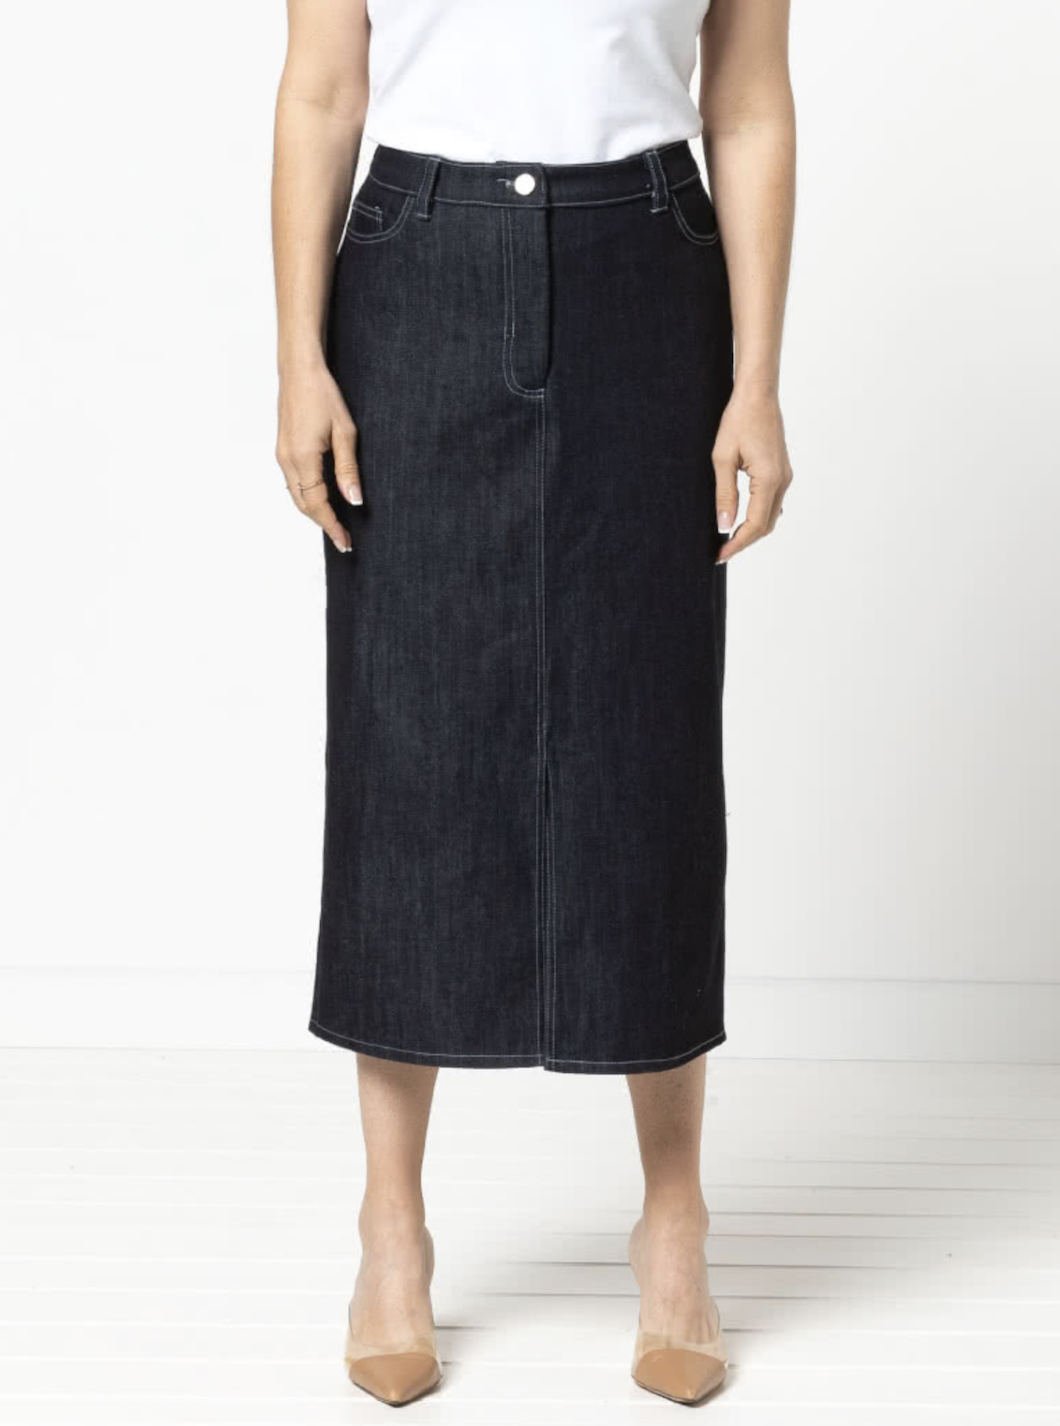 Style Arc Tommie Jeans Skirt - The Fold Line